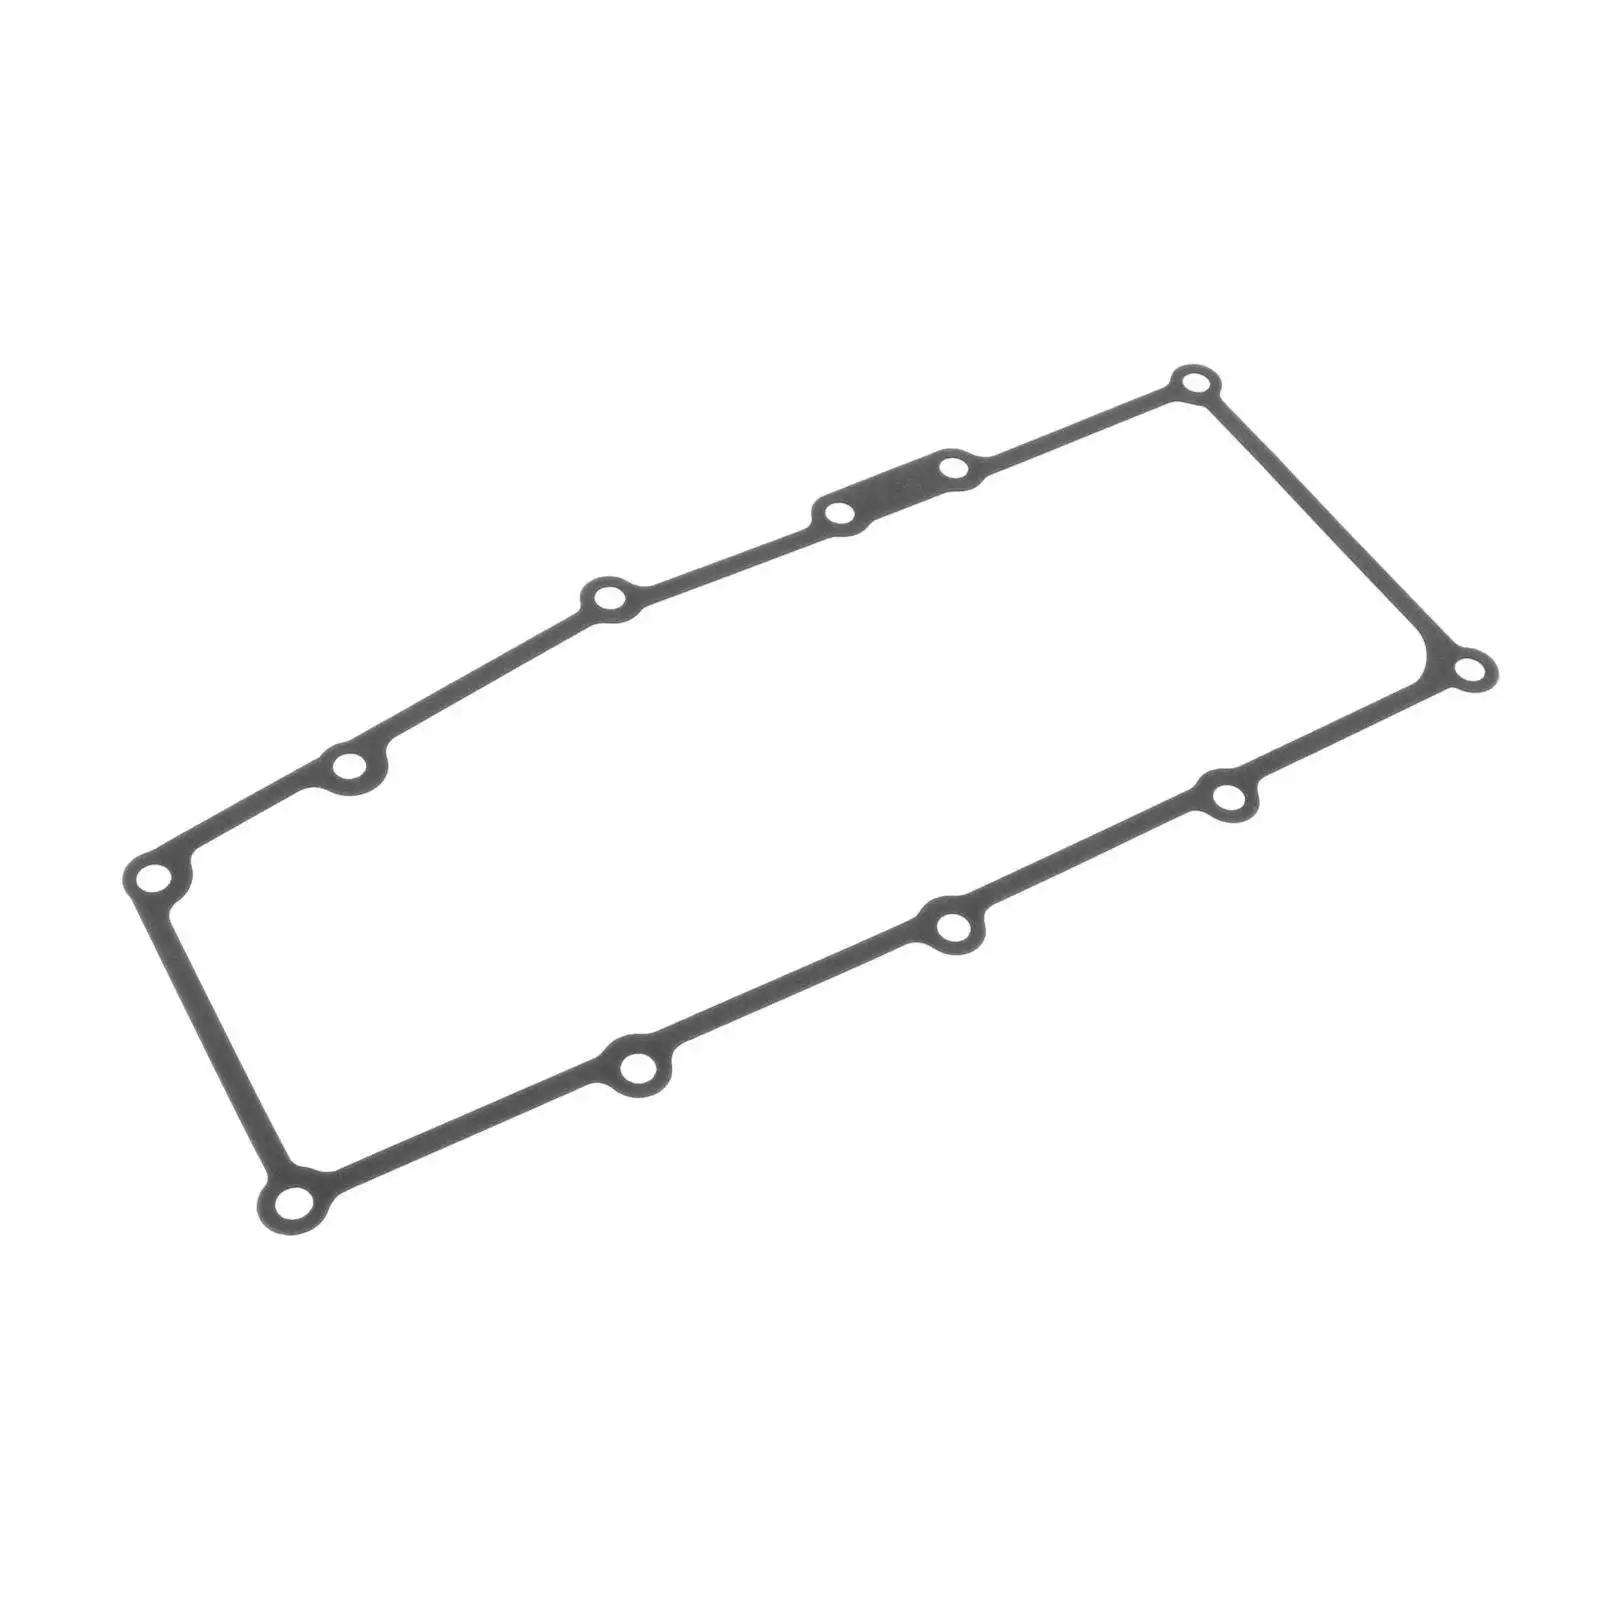 Crankcase Water Intake Gasket Compatible with Yamaha FX FZ VX 6BH-13557-00 Replacement Accessories